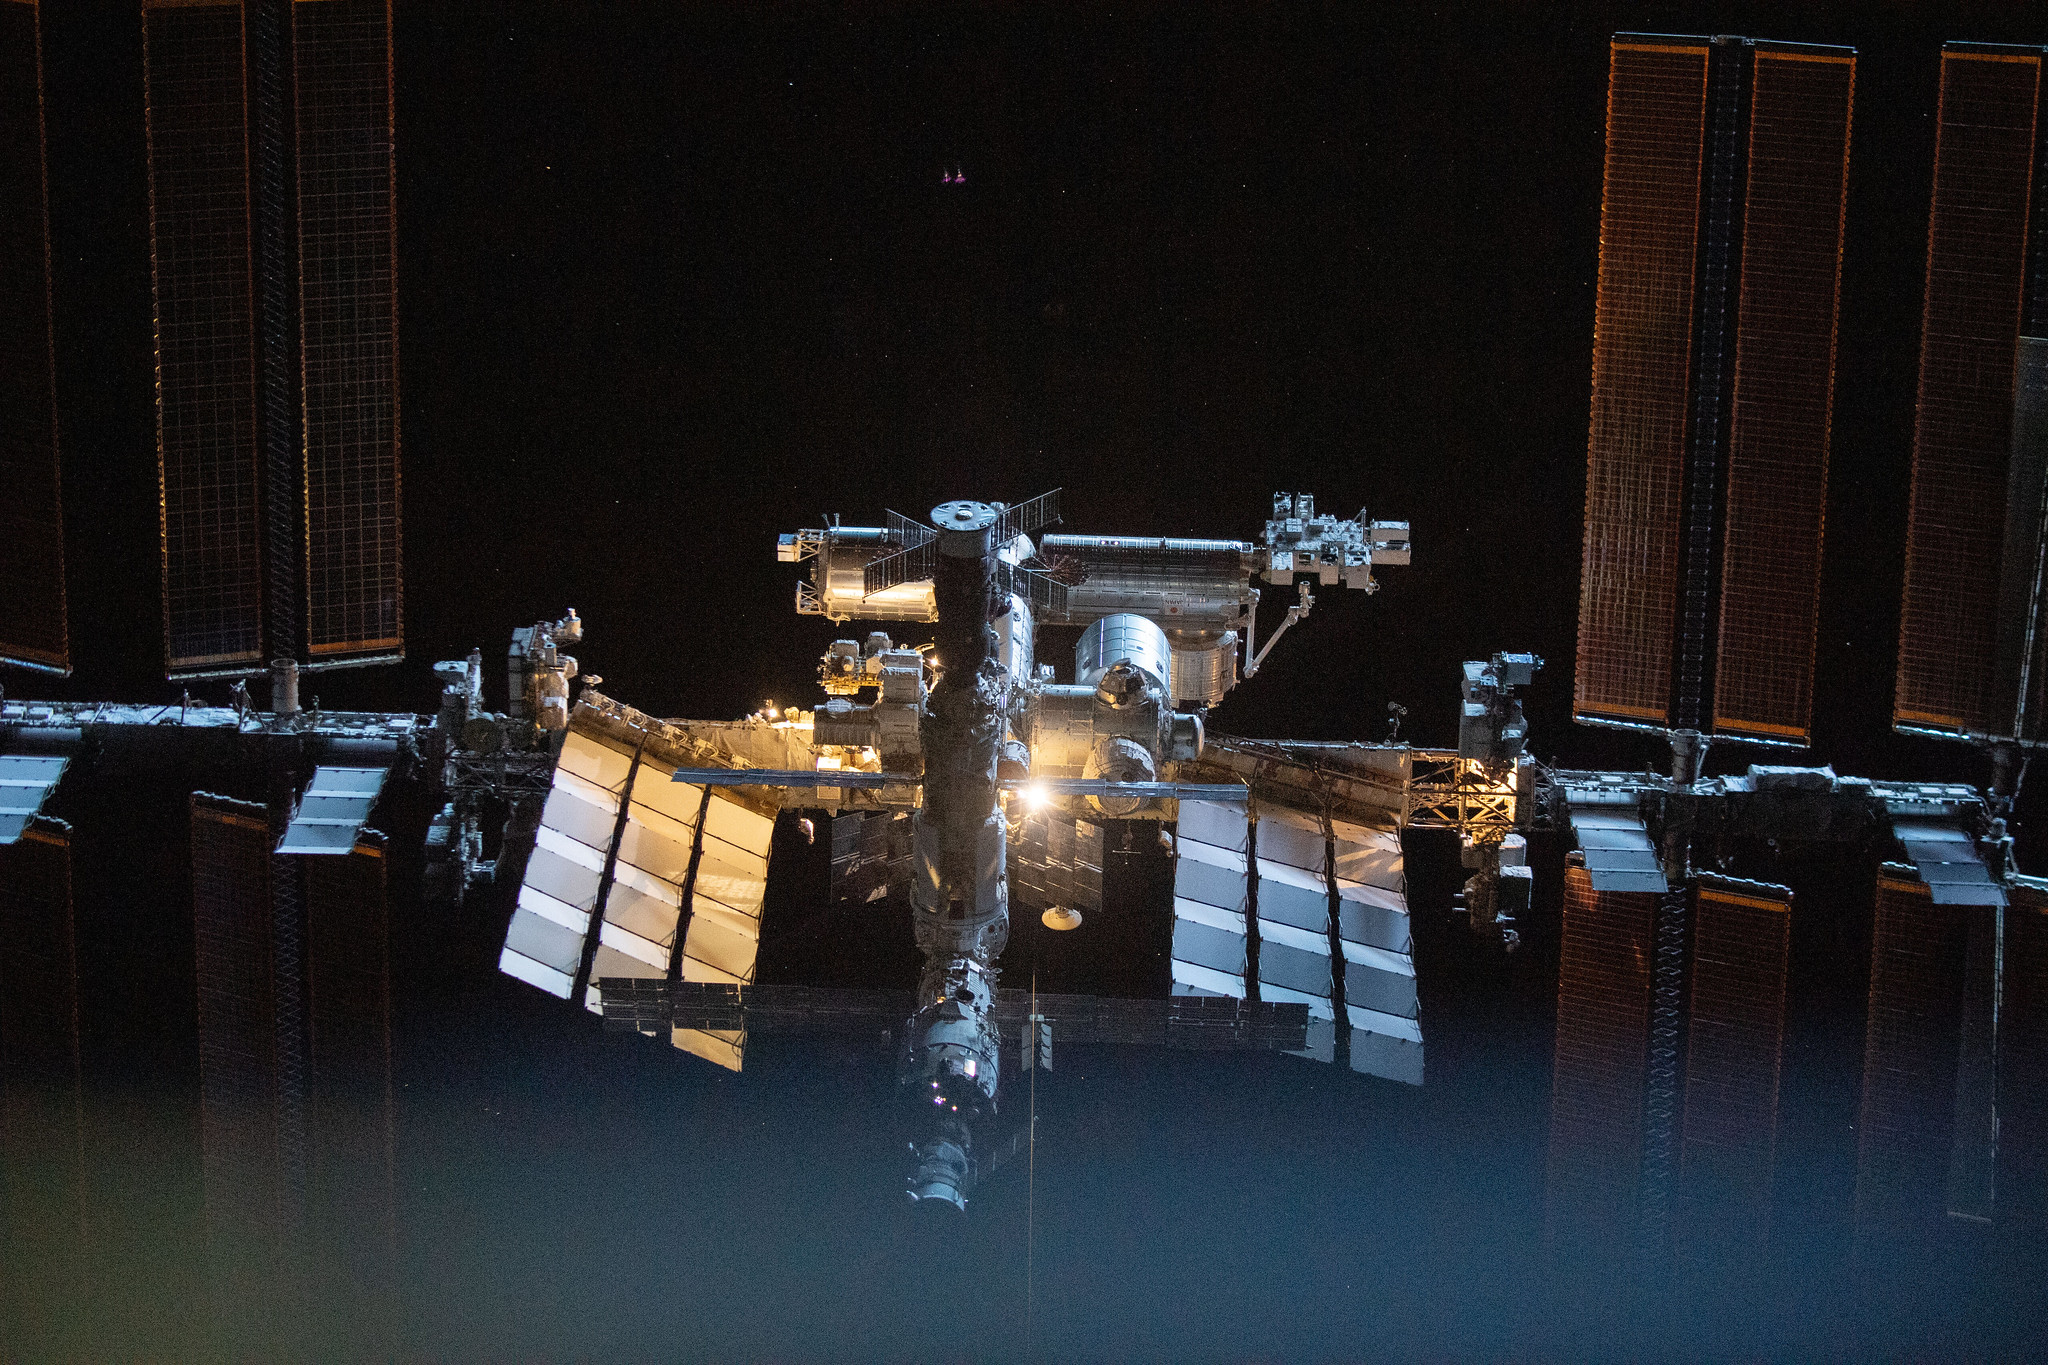 The International Space Station in orbit with deep space in the background